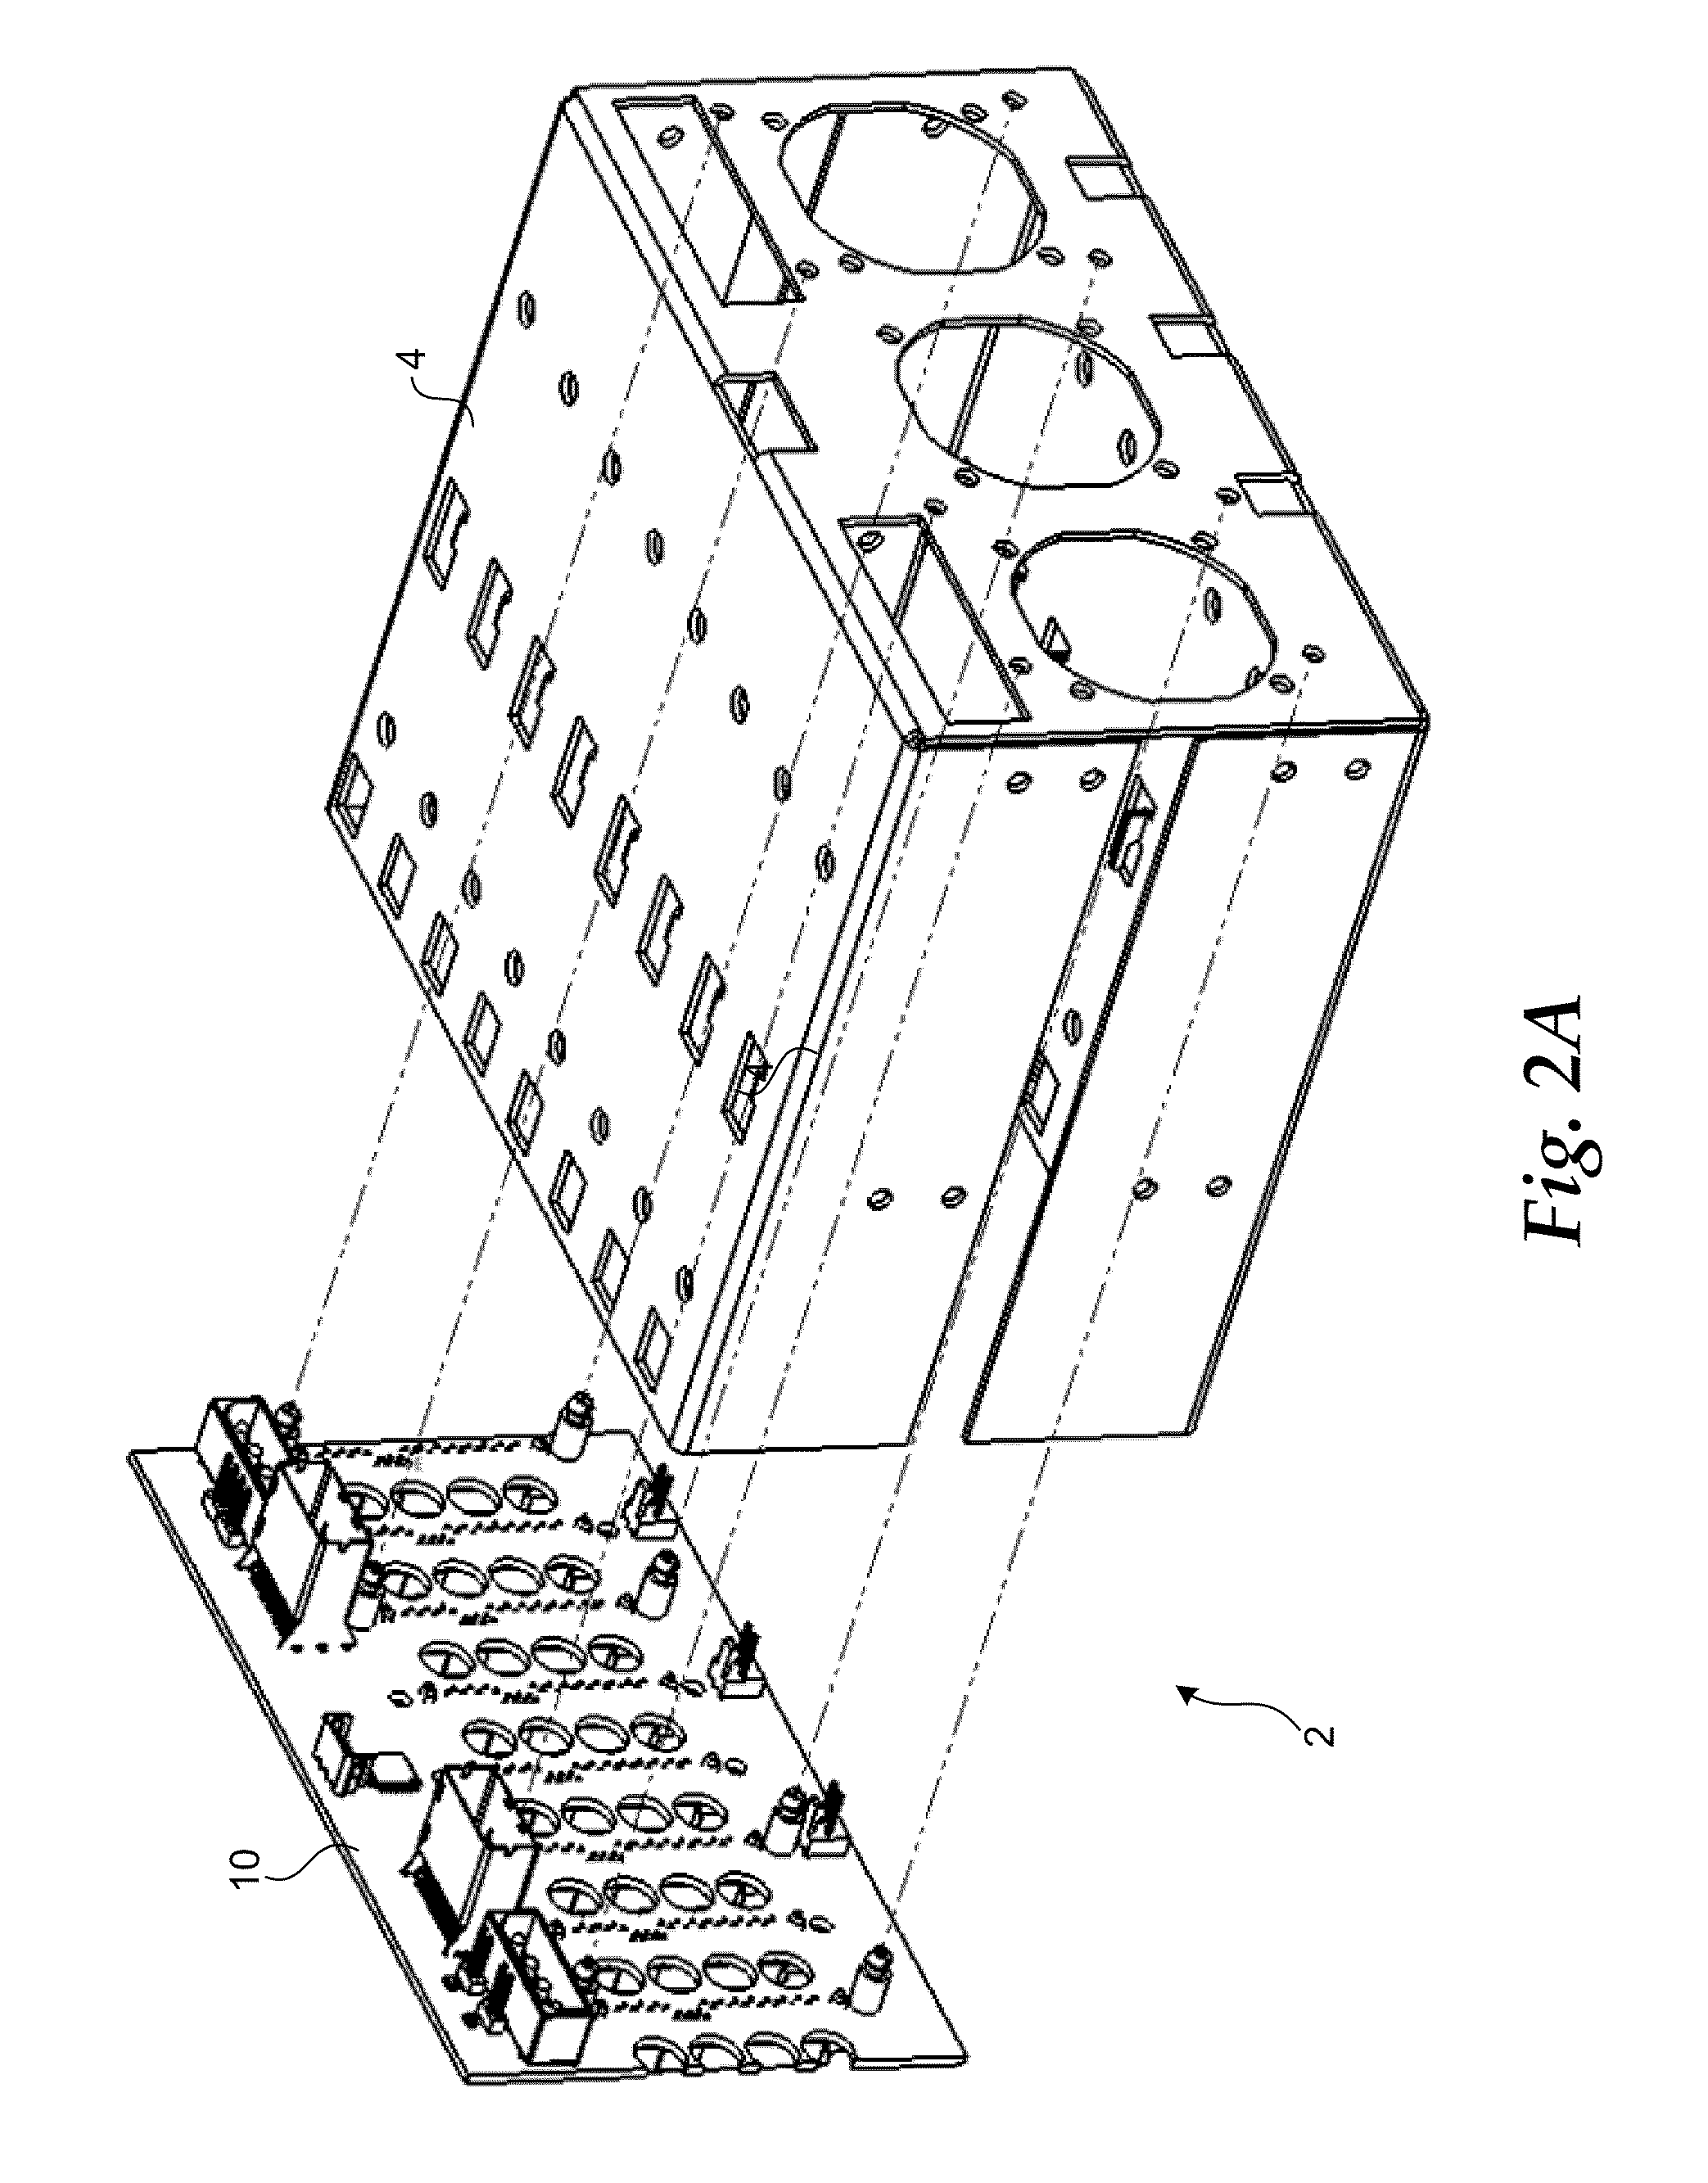 System and apparatus for removably mounting hard disk drives